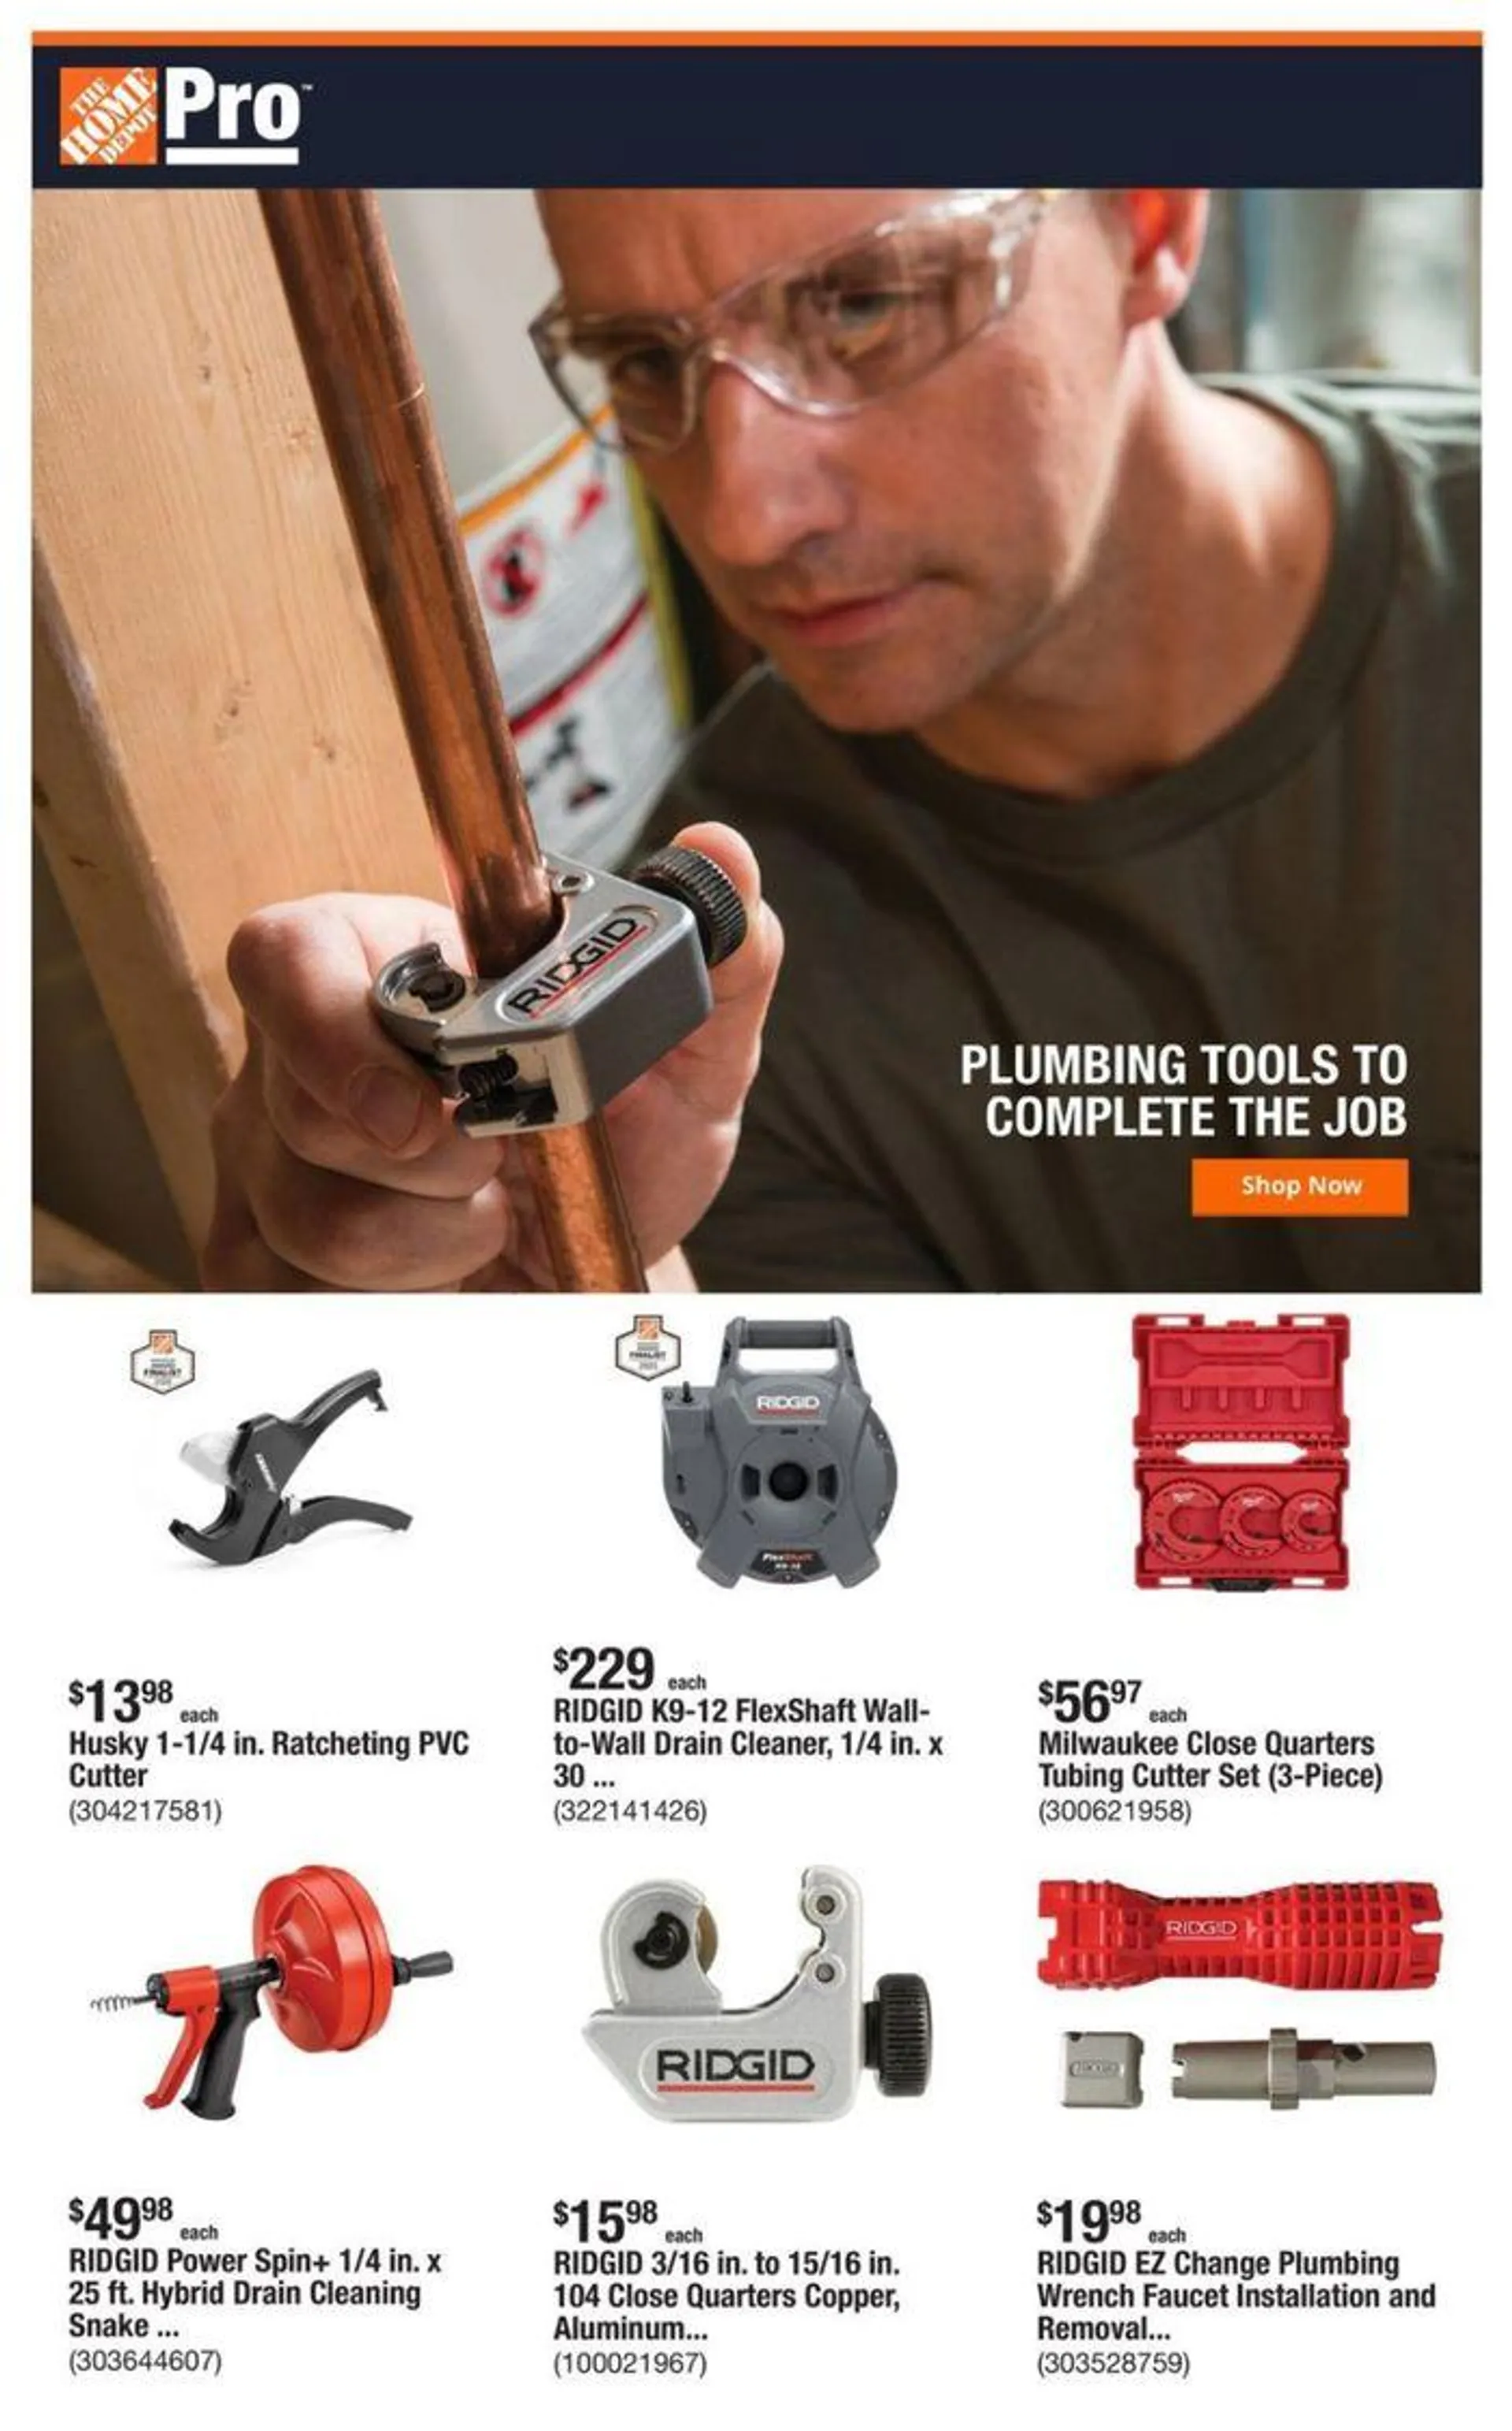 Plumbing Tools To Complete The Job - 1